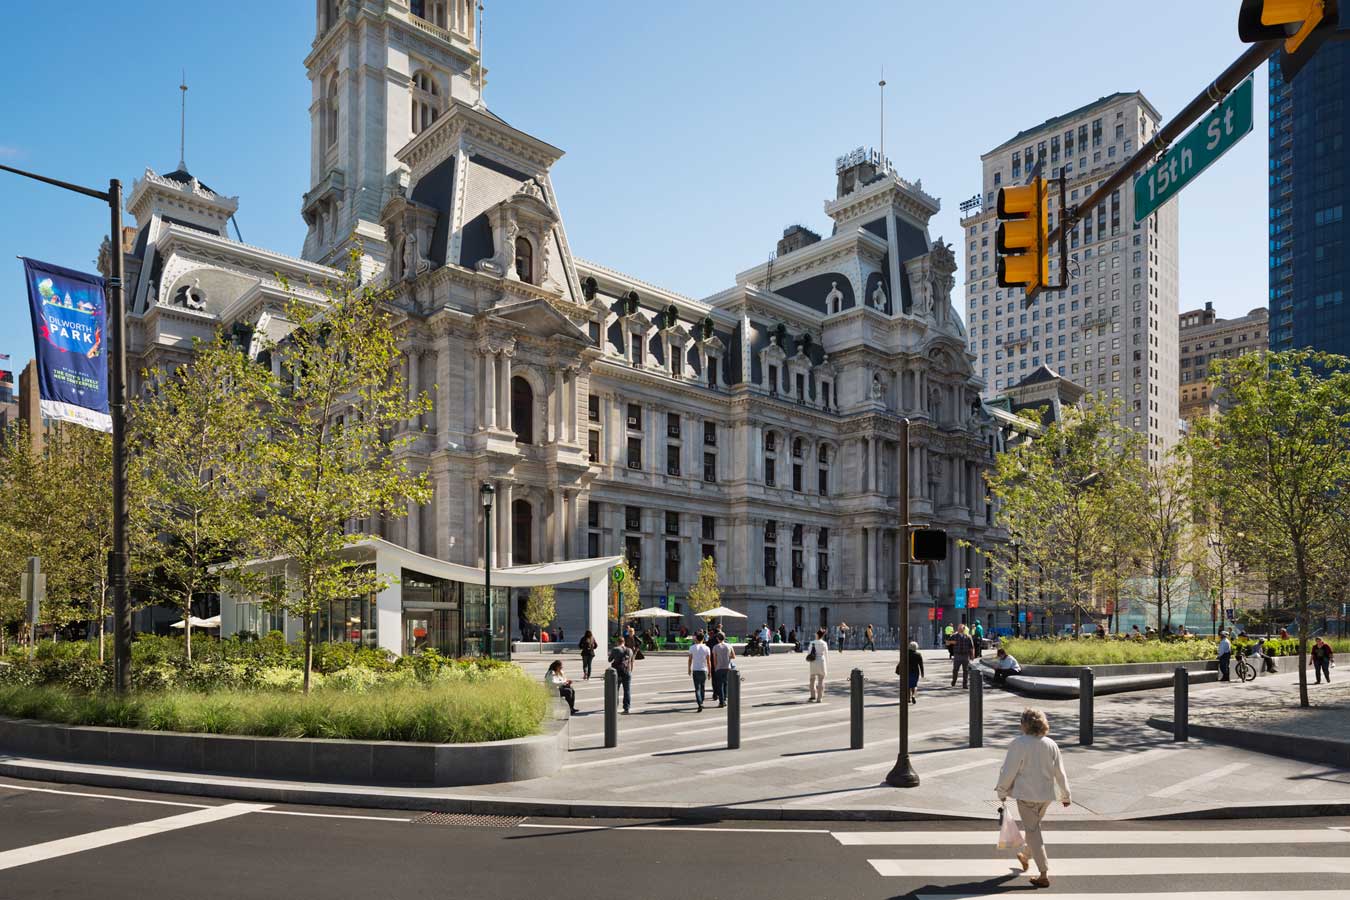 <p>In the new scheme, usable area increases by 21 percent. Multiple levels are eliminated, creating an even surface for the entire plaza, on grade with City Hall. The approach becomes more pedestrian-friendly, and a ring of trees at the periphery defines a boundary to create an oasis within the busy center of the city. <br><small>&copy; James Ewing Photography</small></p>